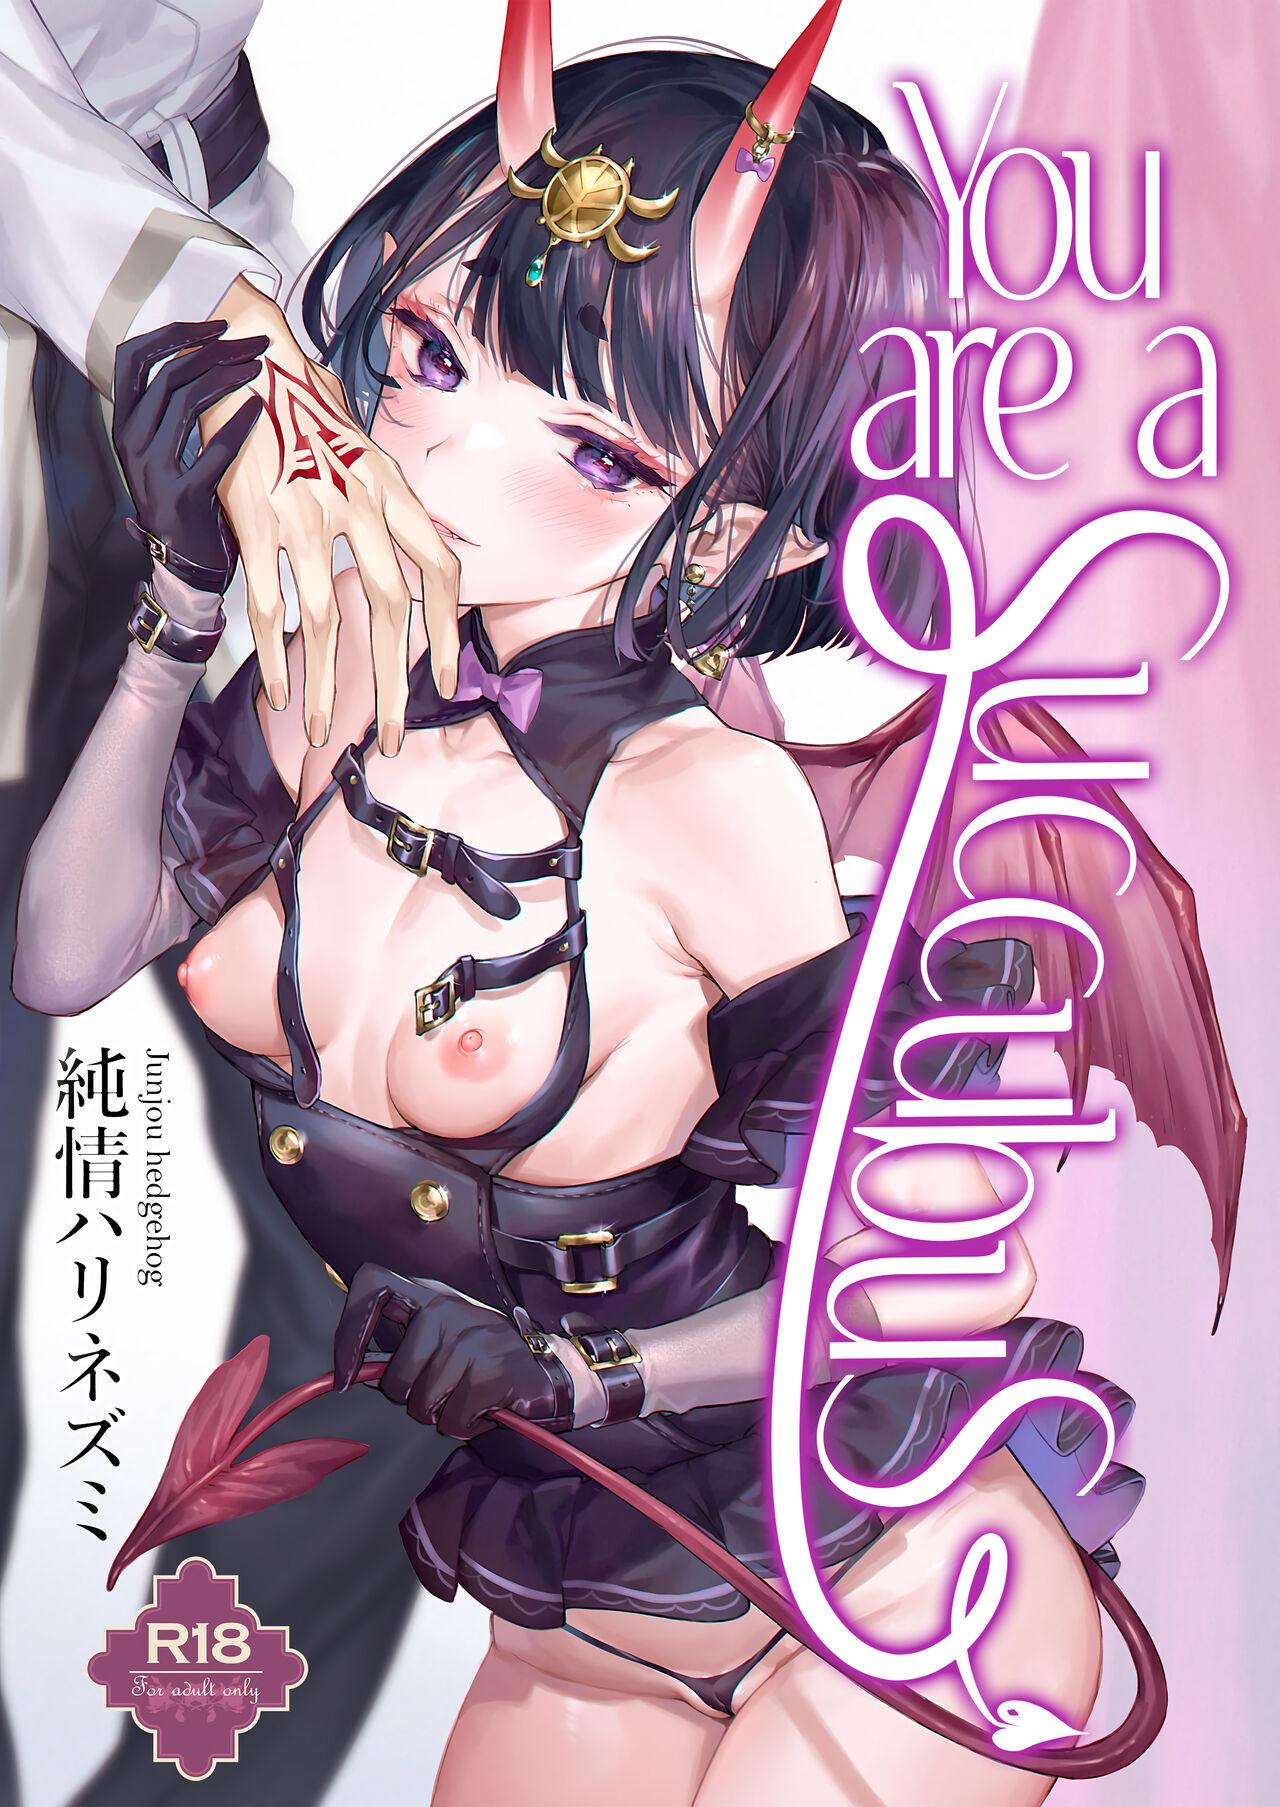 Interracial Sex Kimi wa Succubus | You are a Succubus - Fate grand order Extreme - Page 1